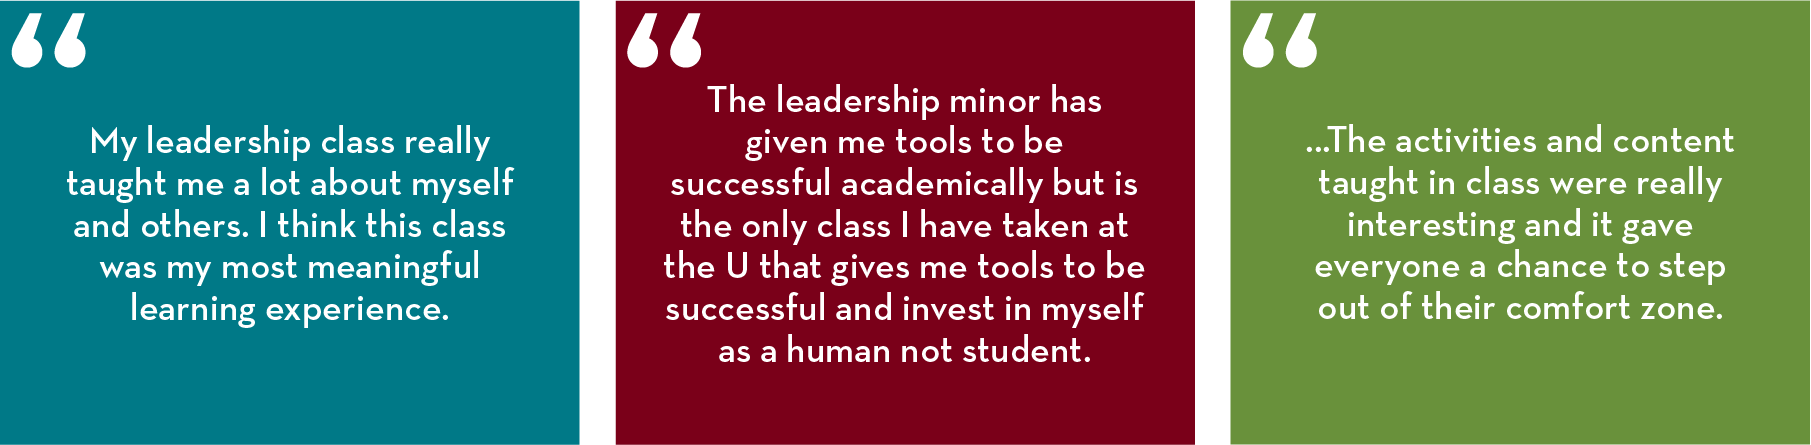 “My leadership class really taught me a lot about myself and others. I think this class was my most meaningful learning experience.”  “The leadership minor has given me tools to be successful academically but is the only class I have taken at the U that g